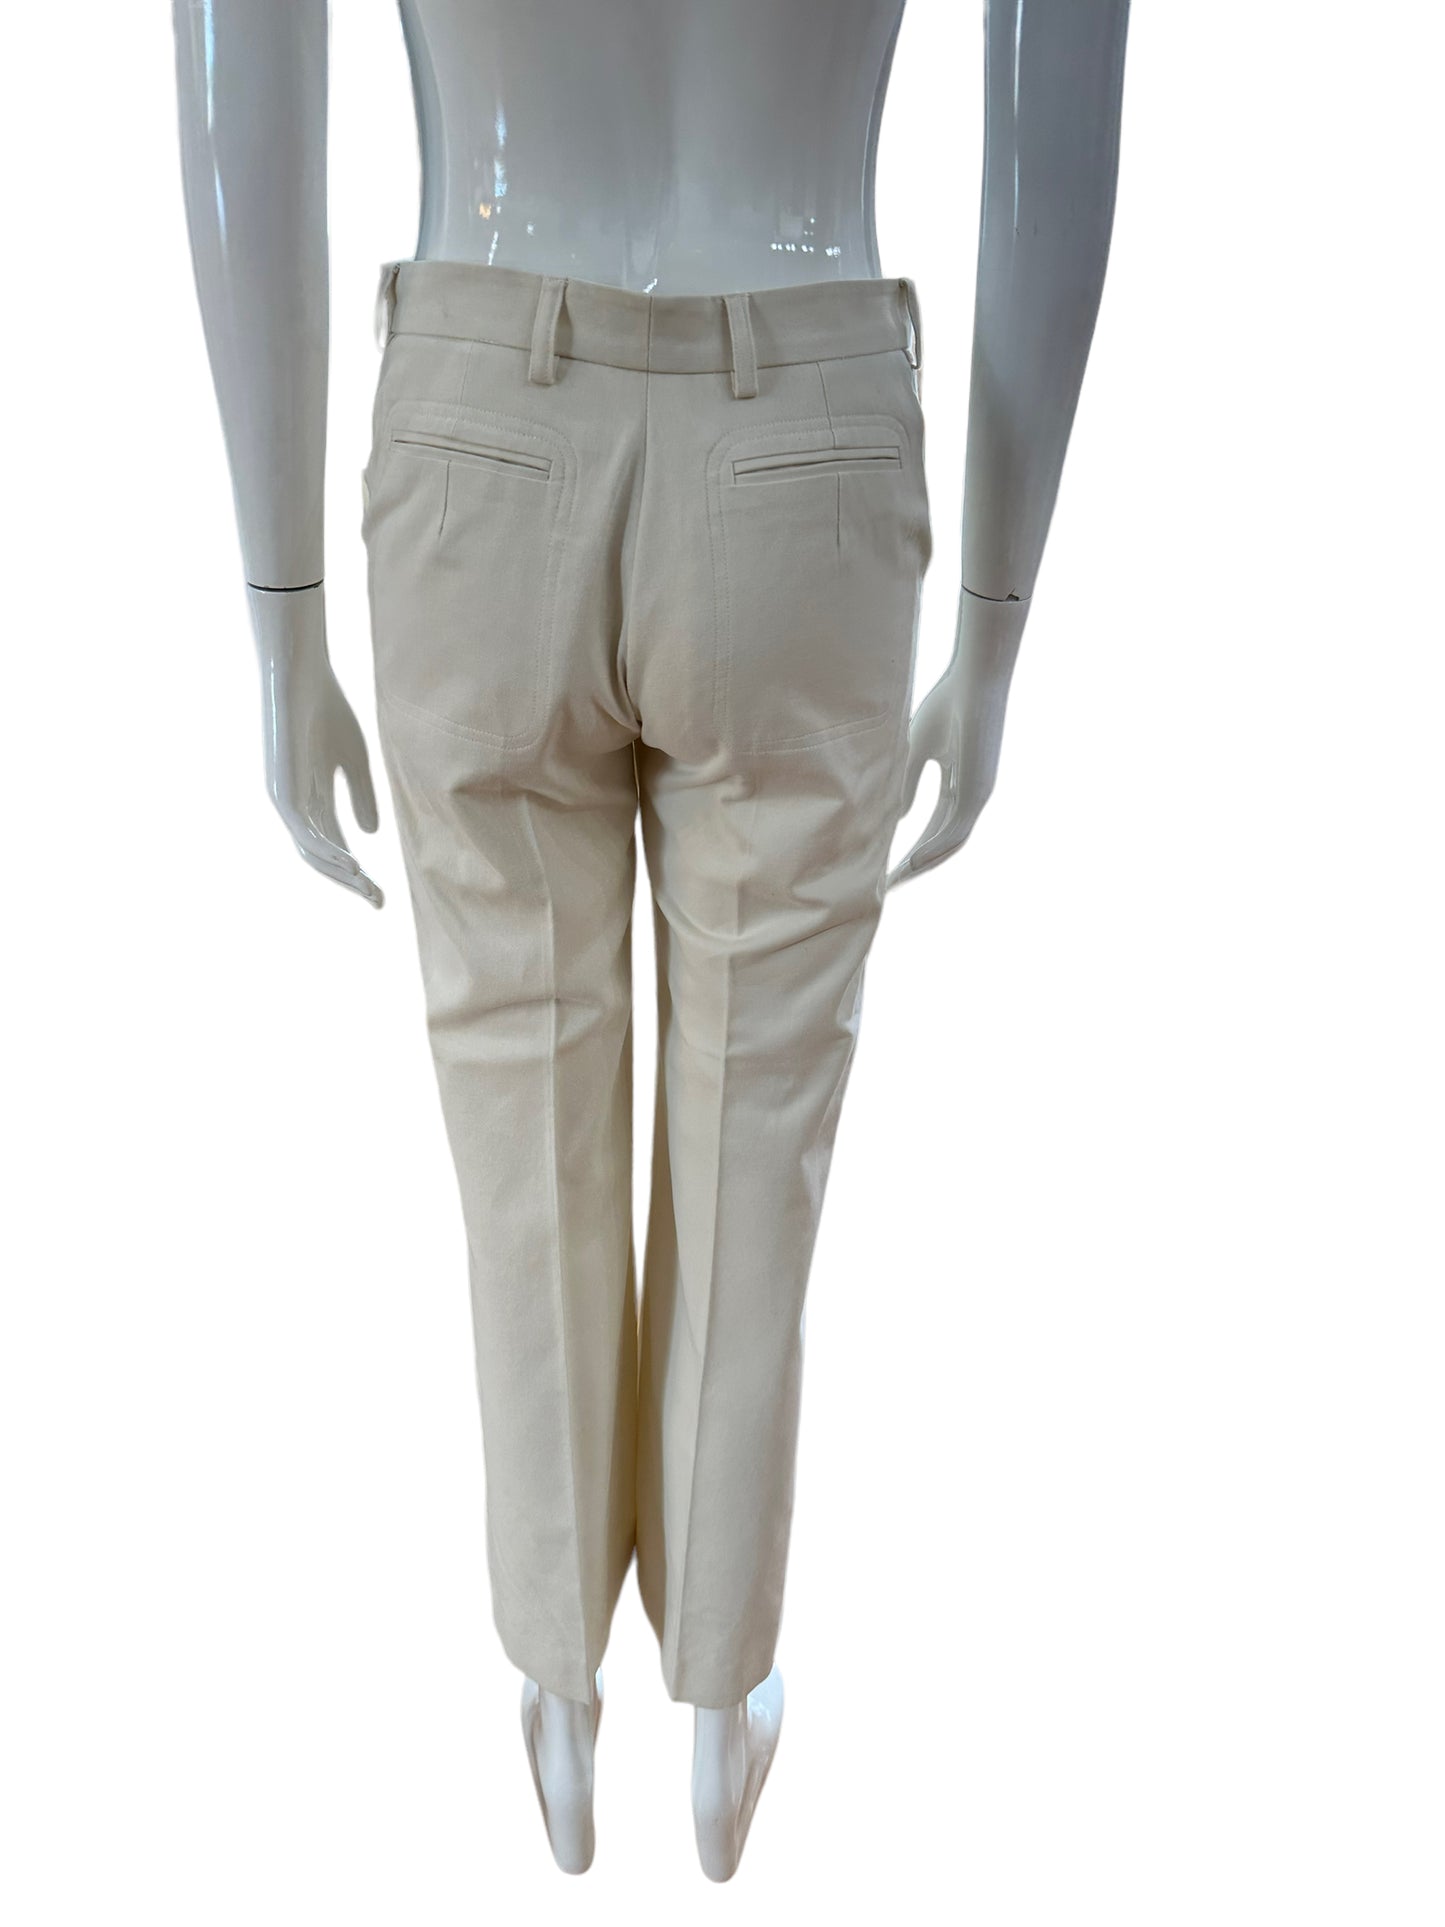 Chloe by Phoebe Philo 2002 Ivory Cut Out Pants Suit F38